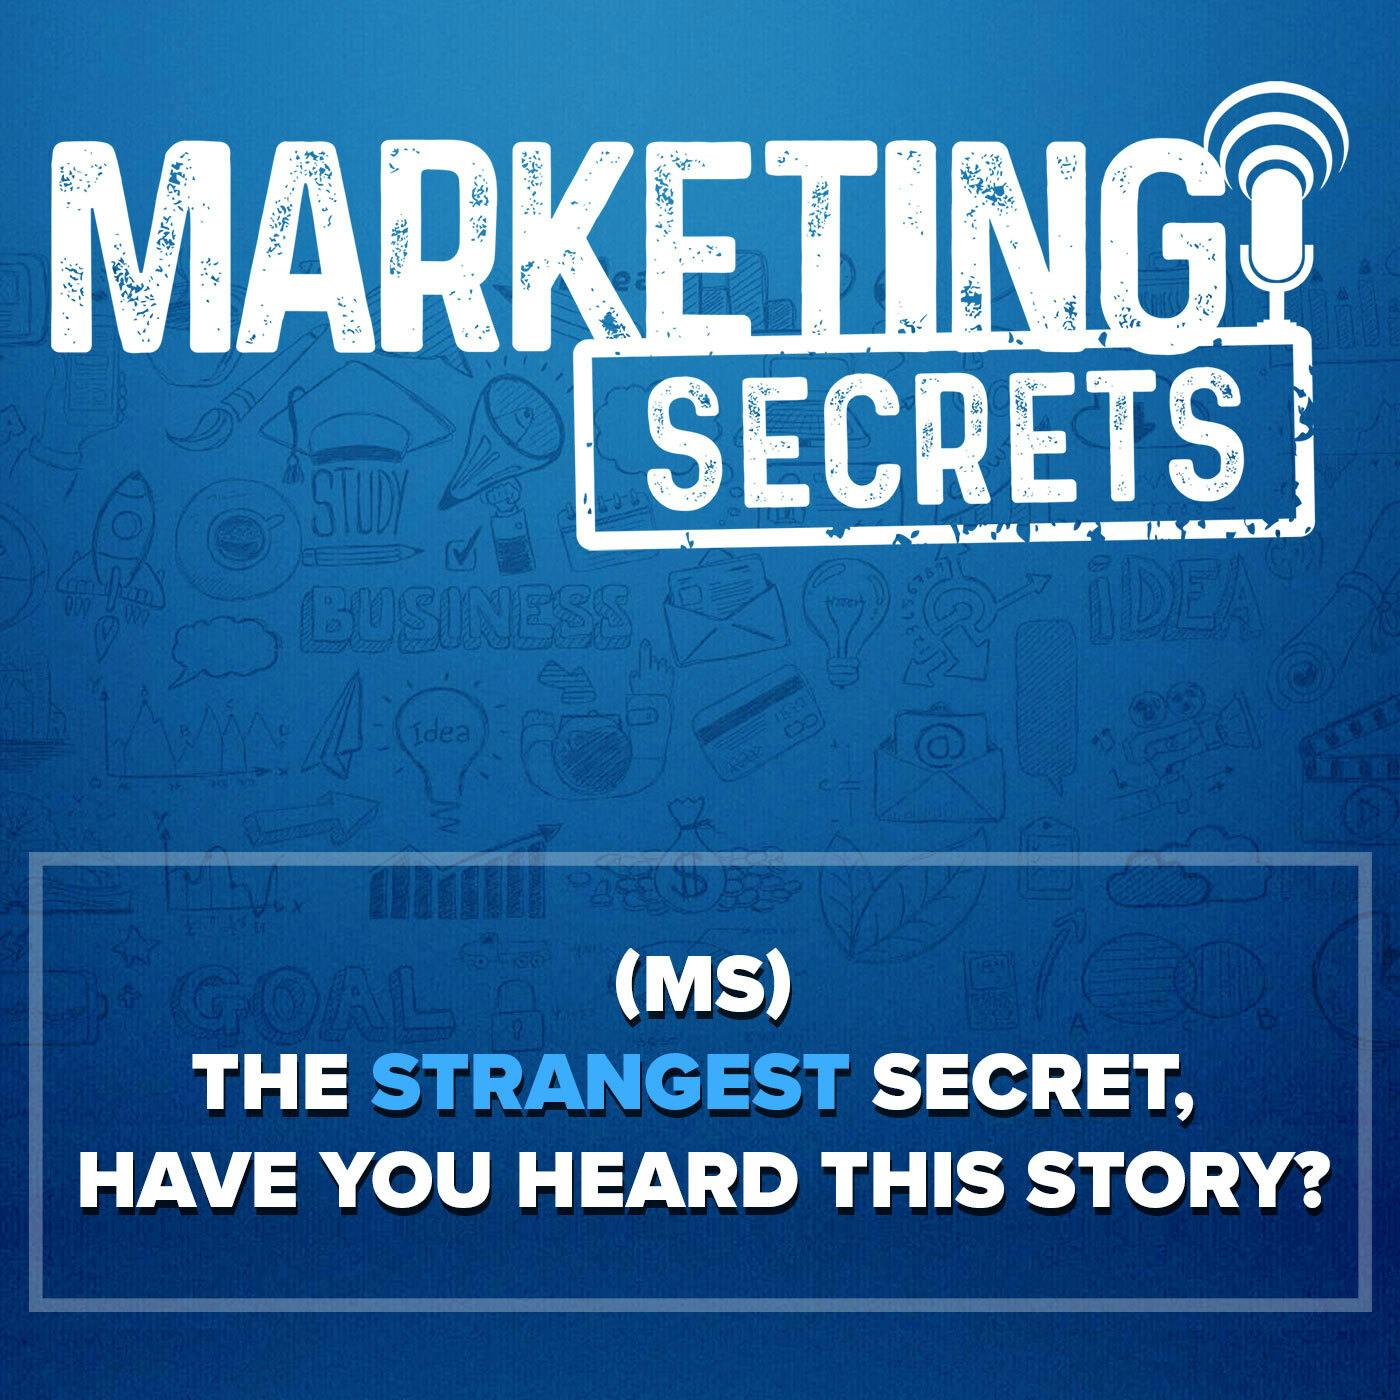 (MS) The Strangest Secret, Have You Heard This Story?